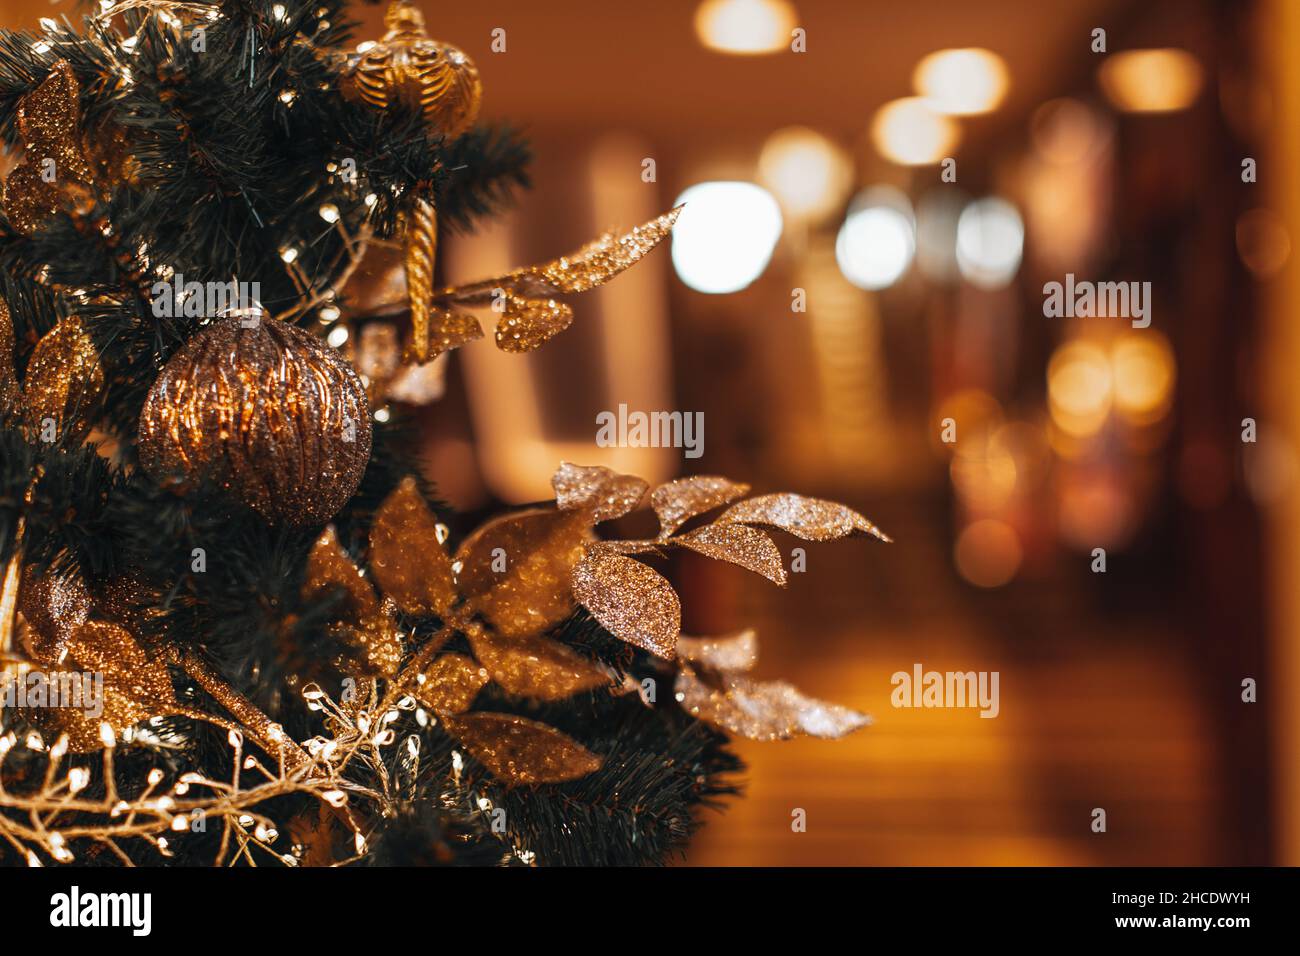 A branch of the Christmas tree decorated with a golden plant leaves, Christmas ball and garlands light. New Year composition in a festive interior Stock Photo